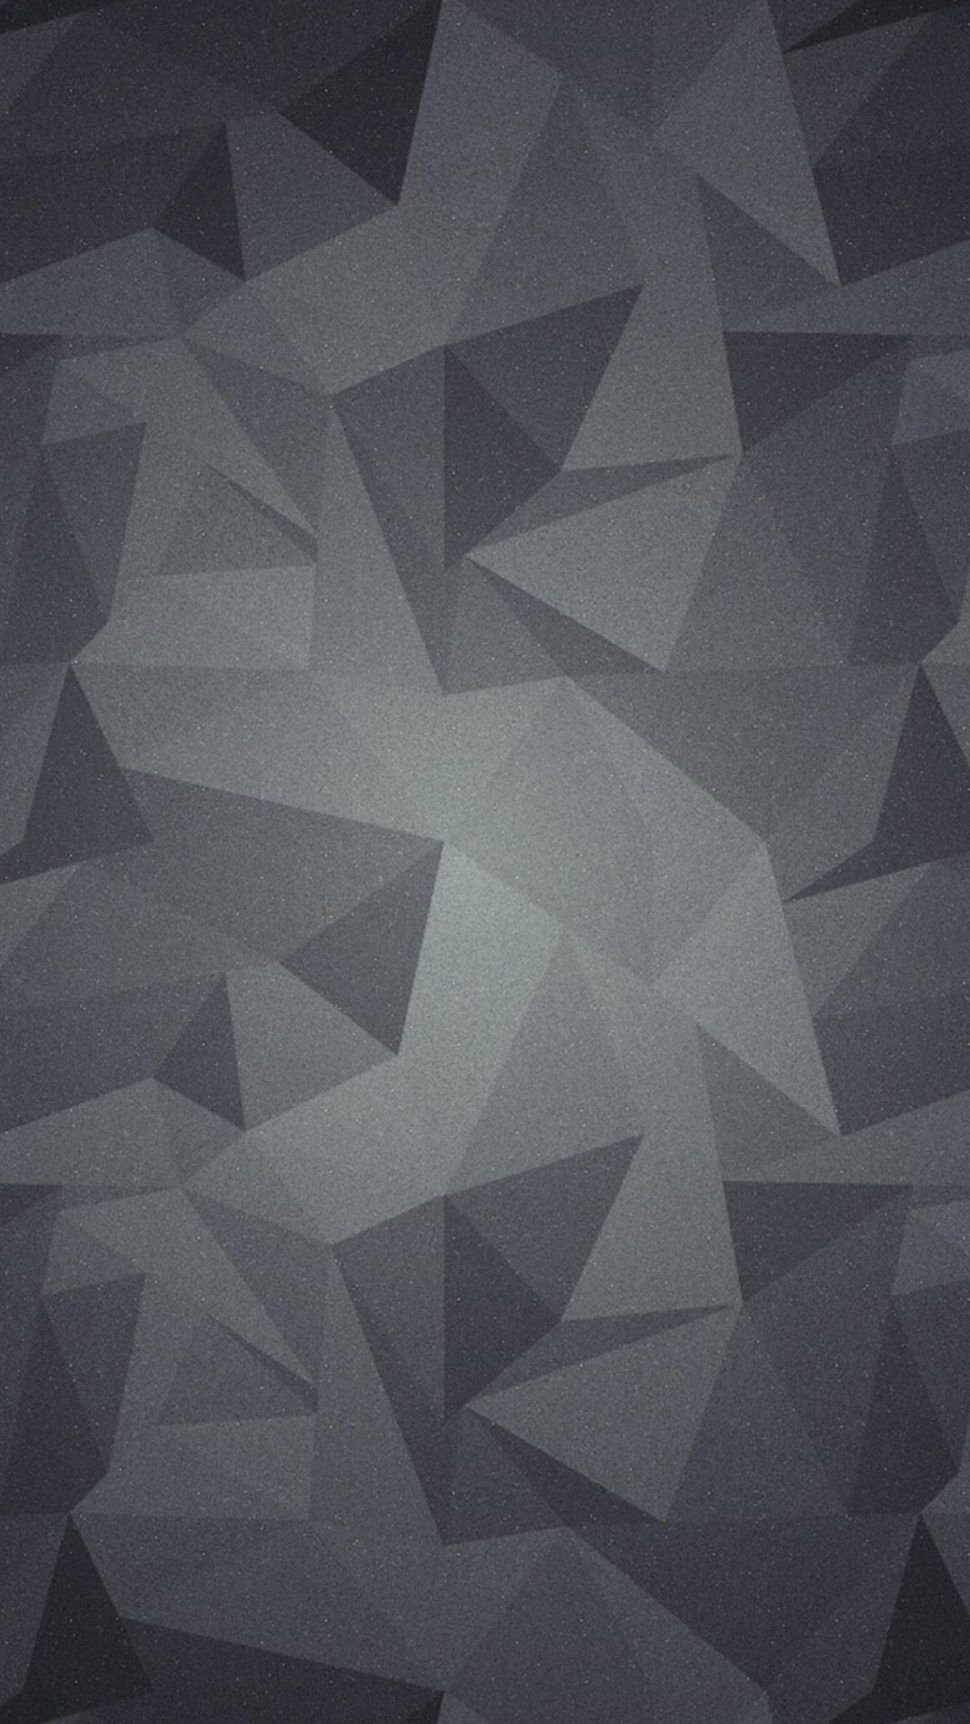 gray and black background wallpaper